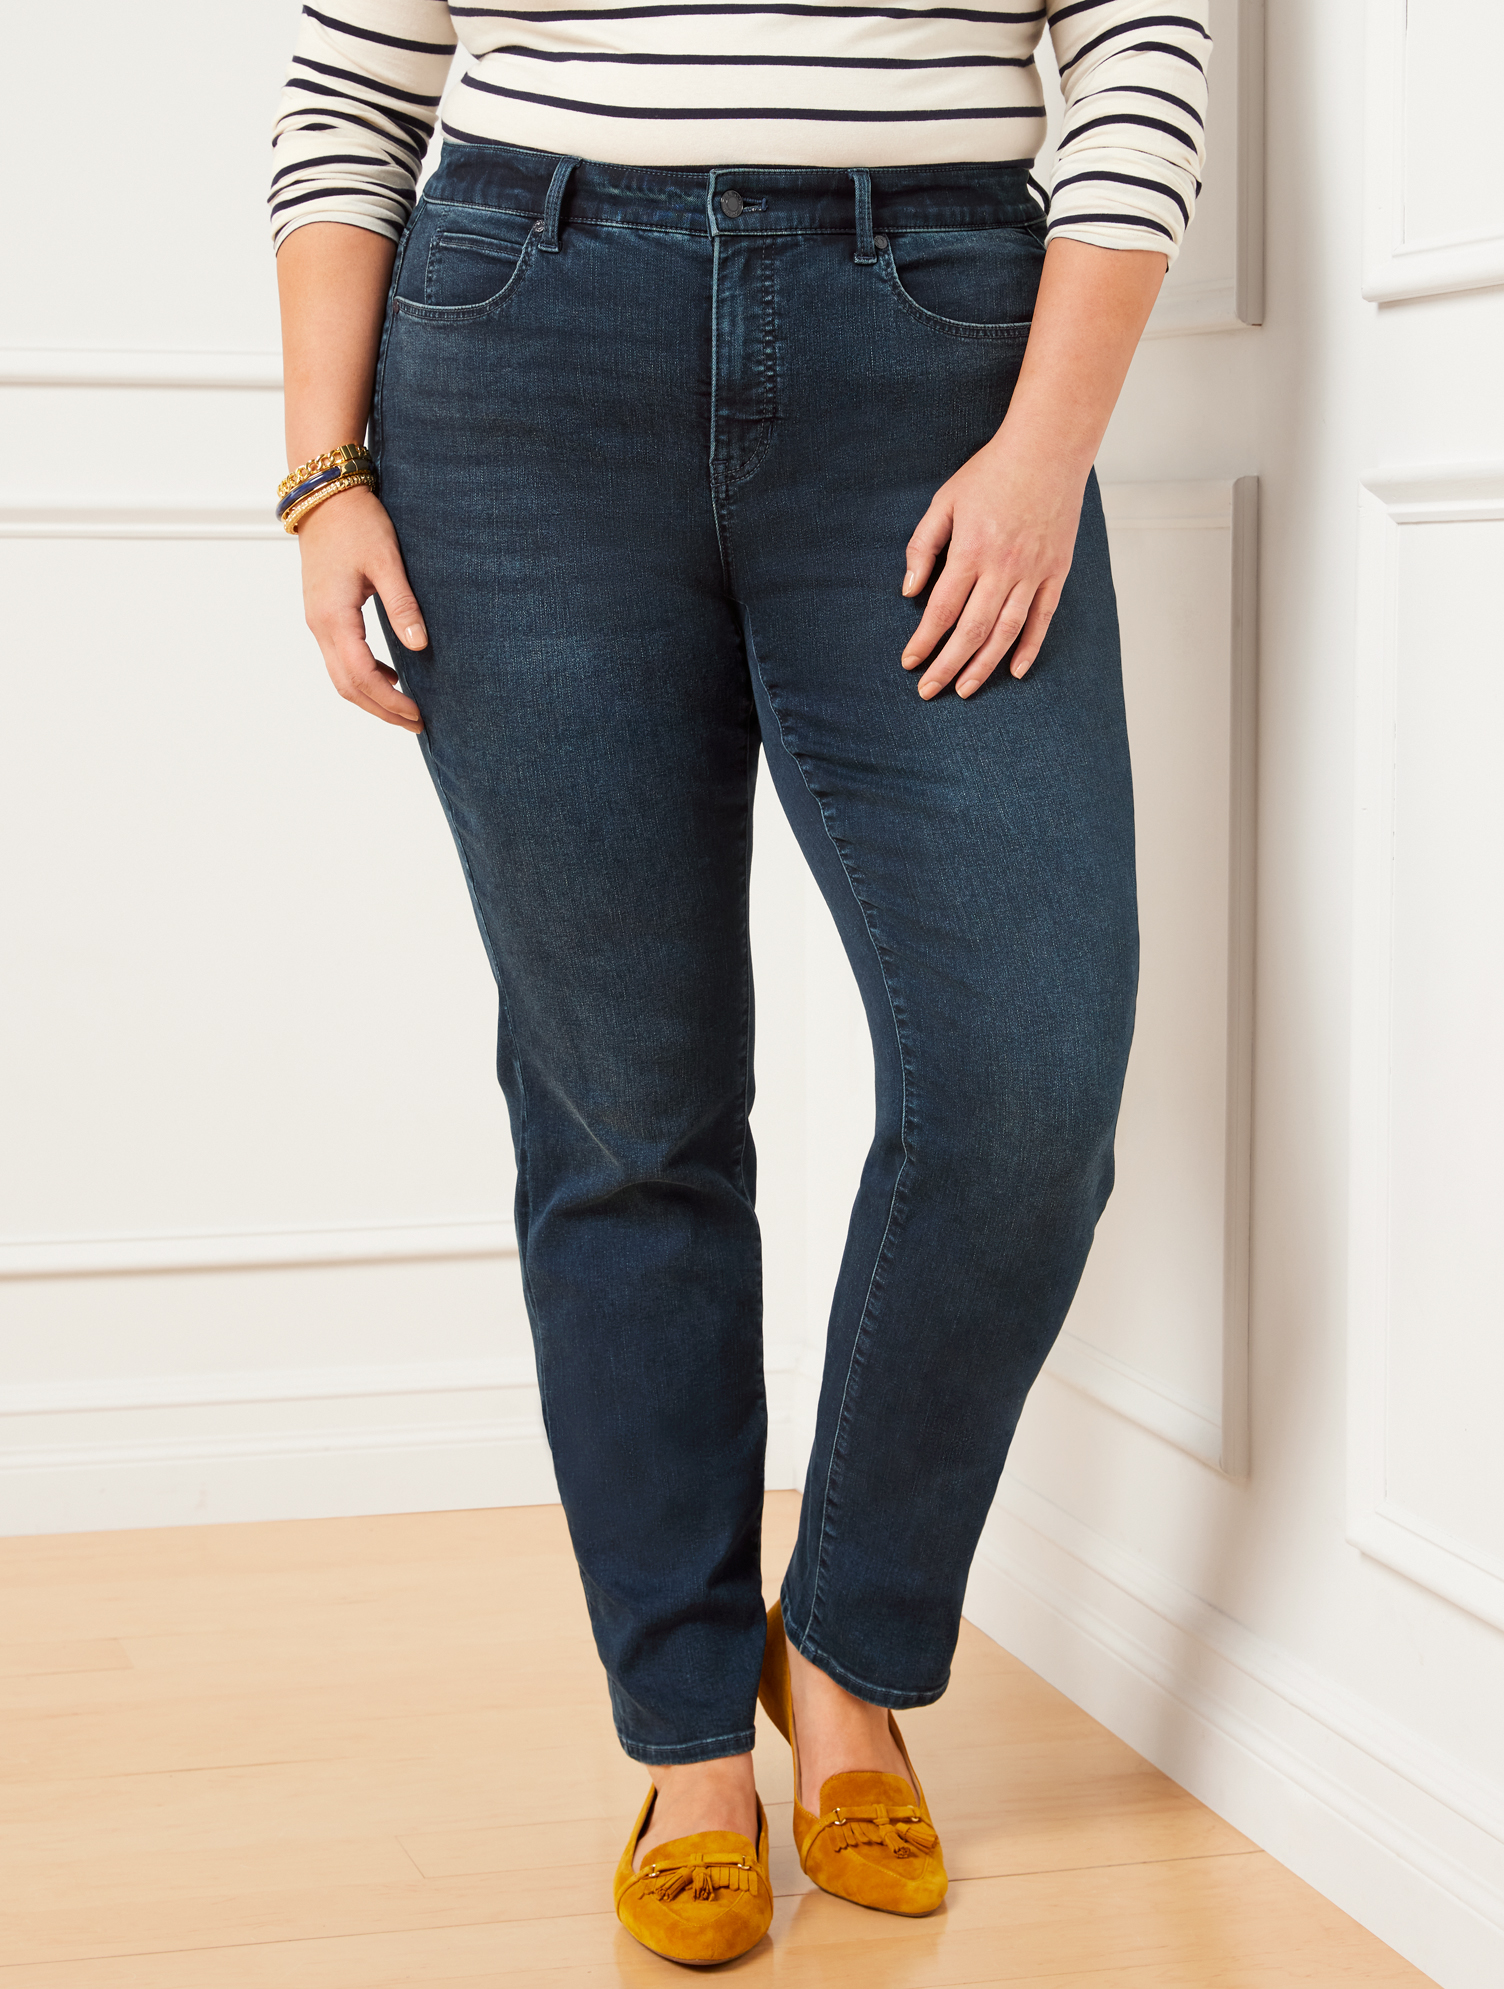 Talbots Plus Exclusive Straight Leg Jeans - Florence Wash - 22